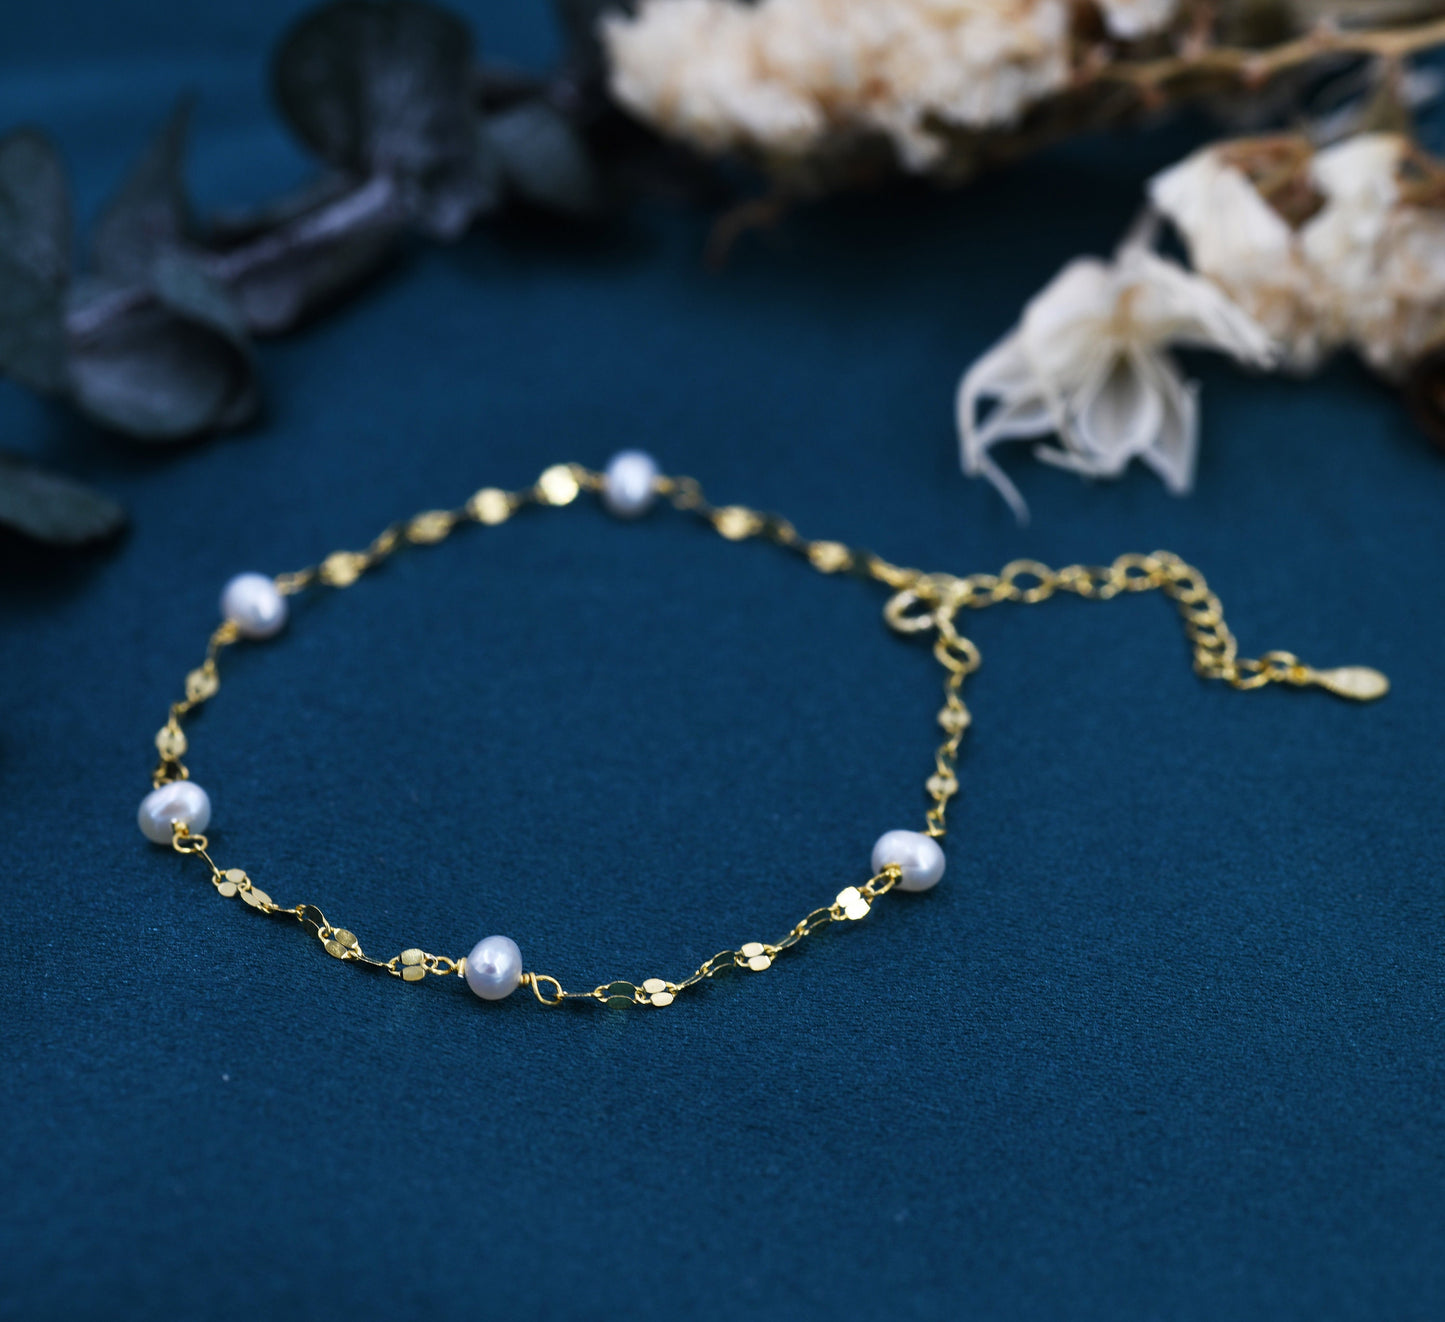 Sterling Silver Pearl Beaded Bracelet with Sparkly Disk Chain, Silver or Gold, Genuine Freshwater Pearls, Natural Pearl Bracelet